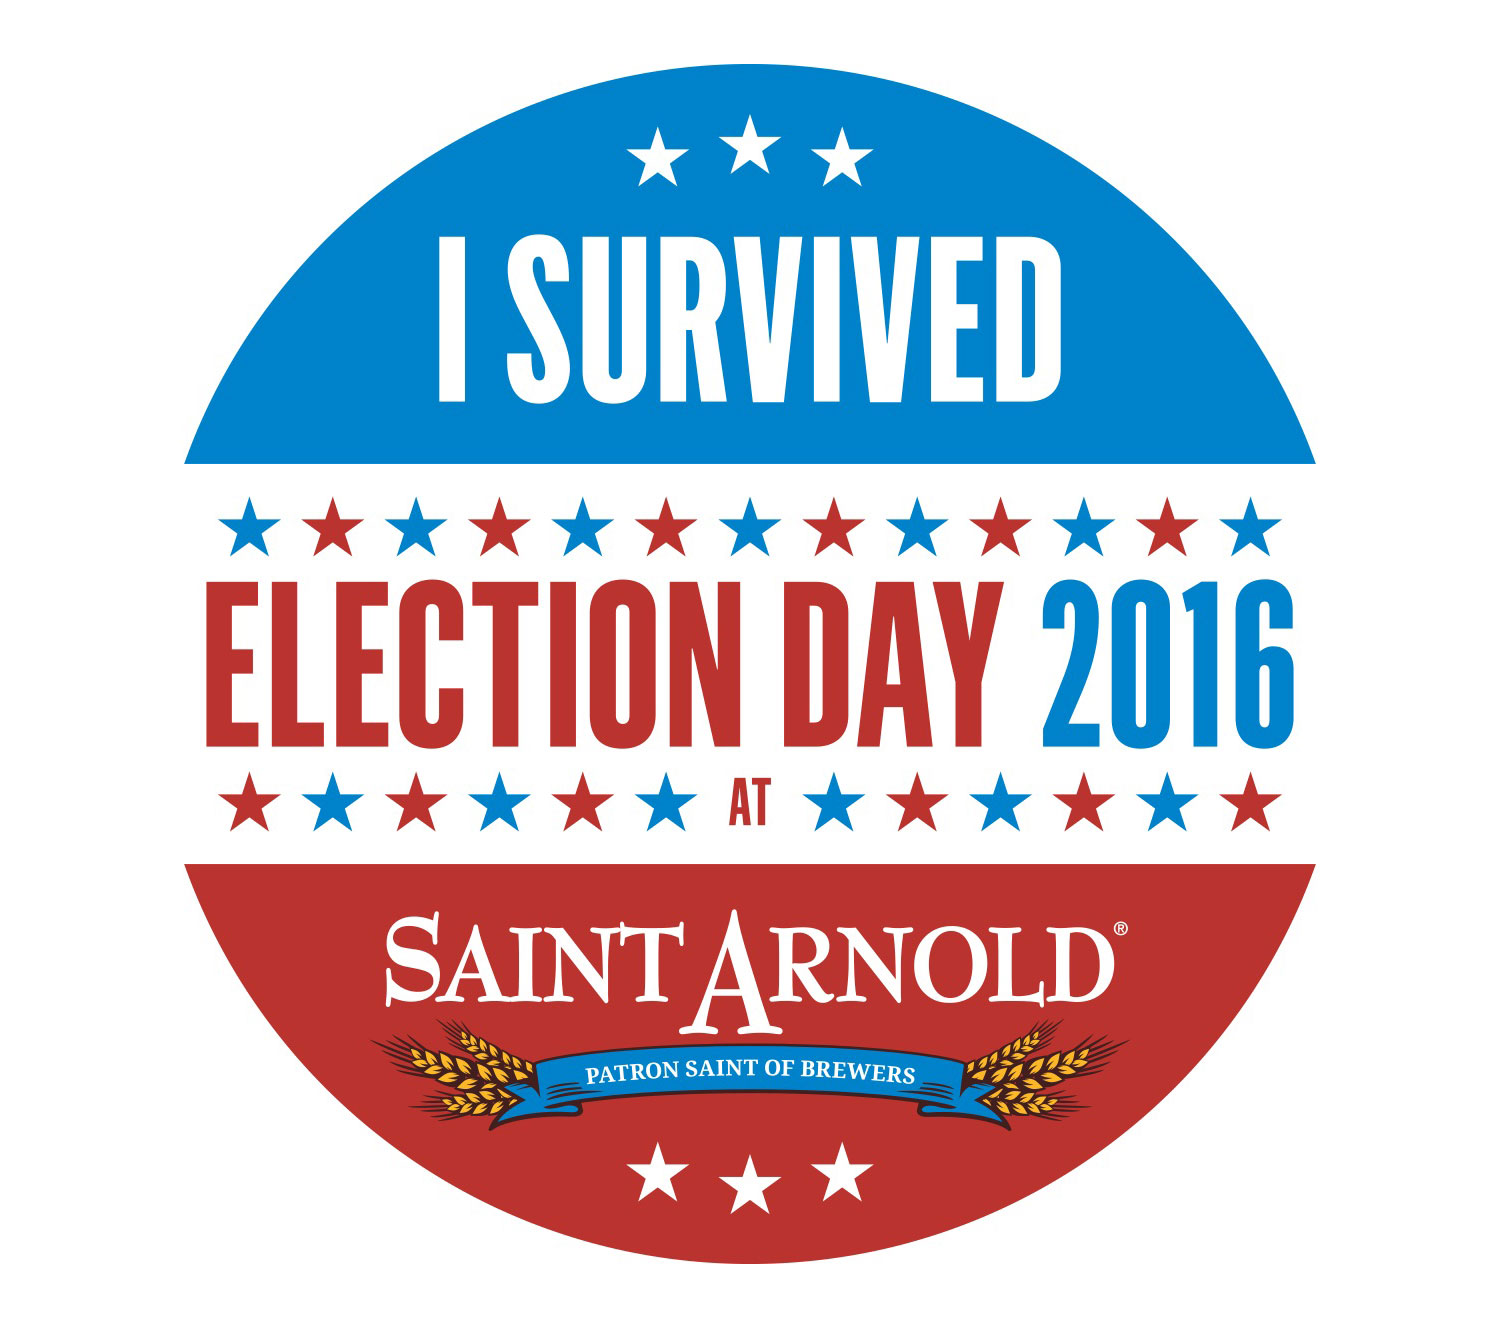 Saint Arnold Election Day